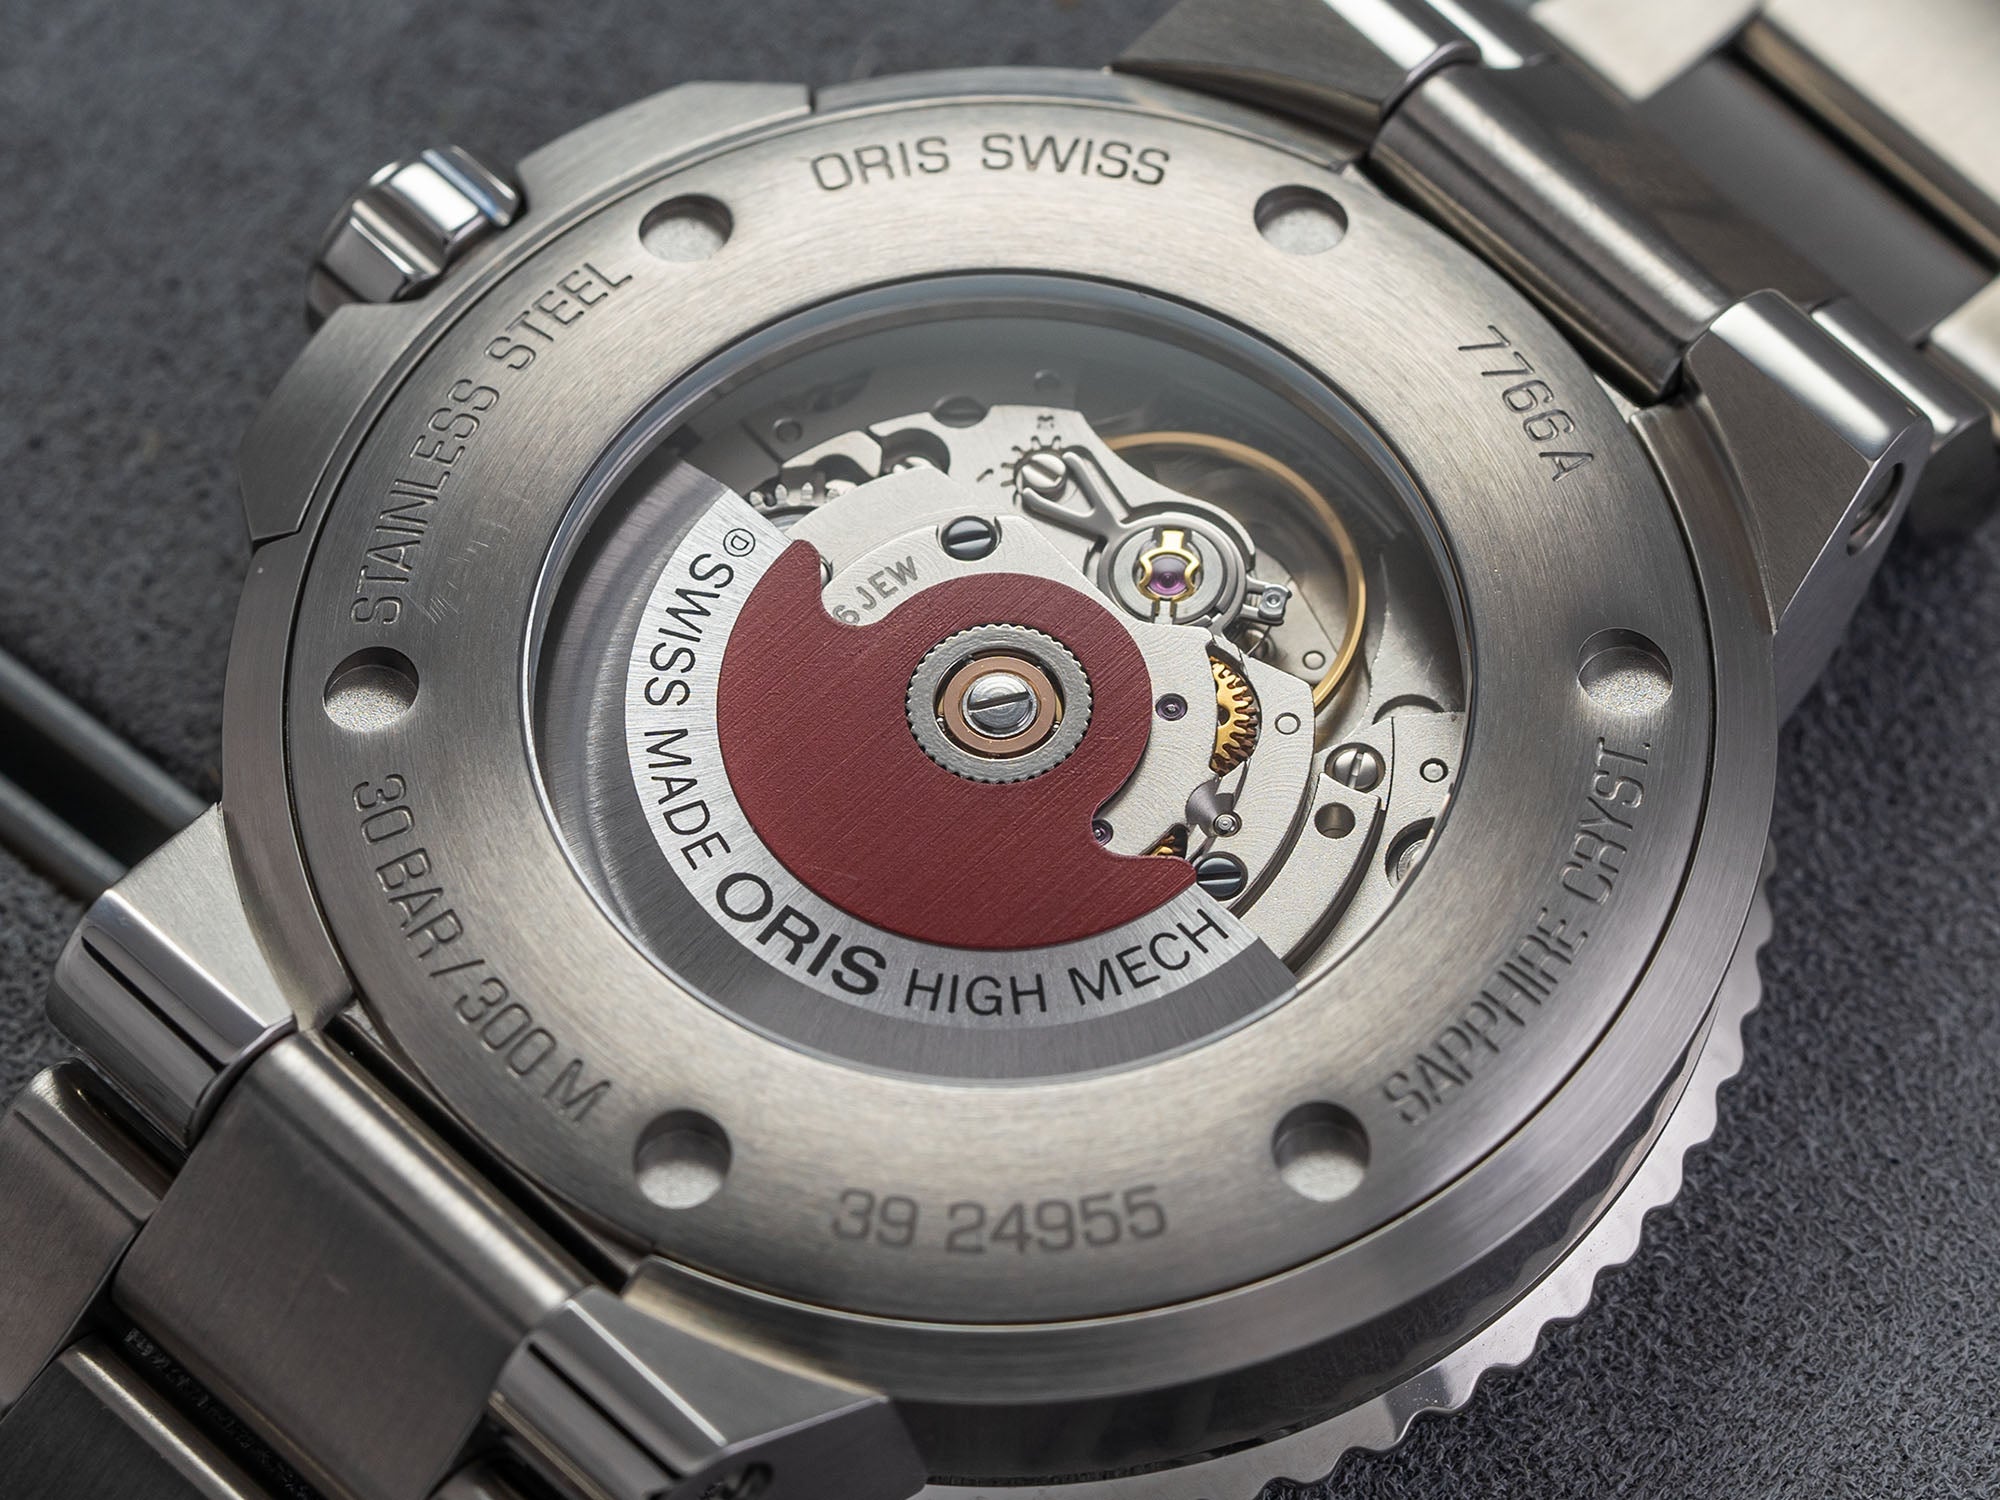 Oris Caliber with red rotor